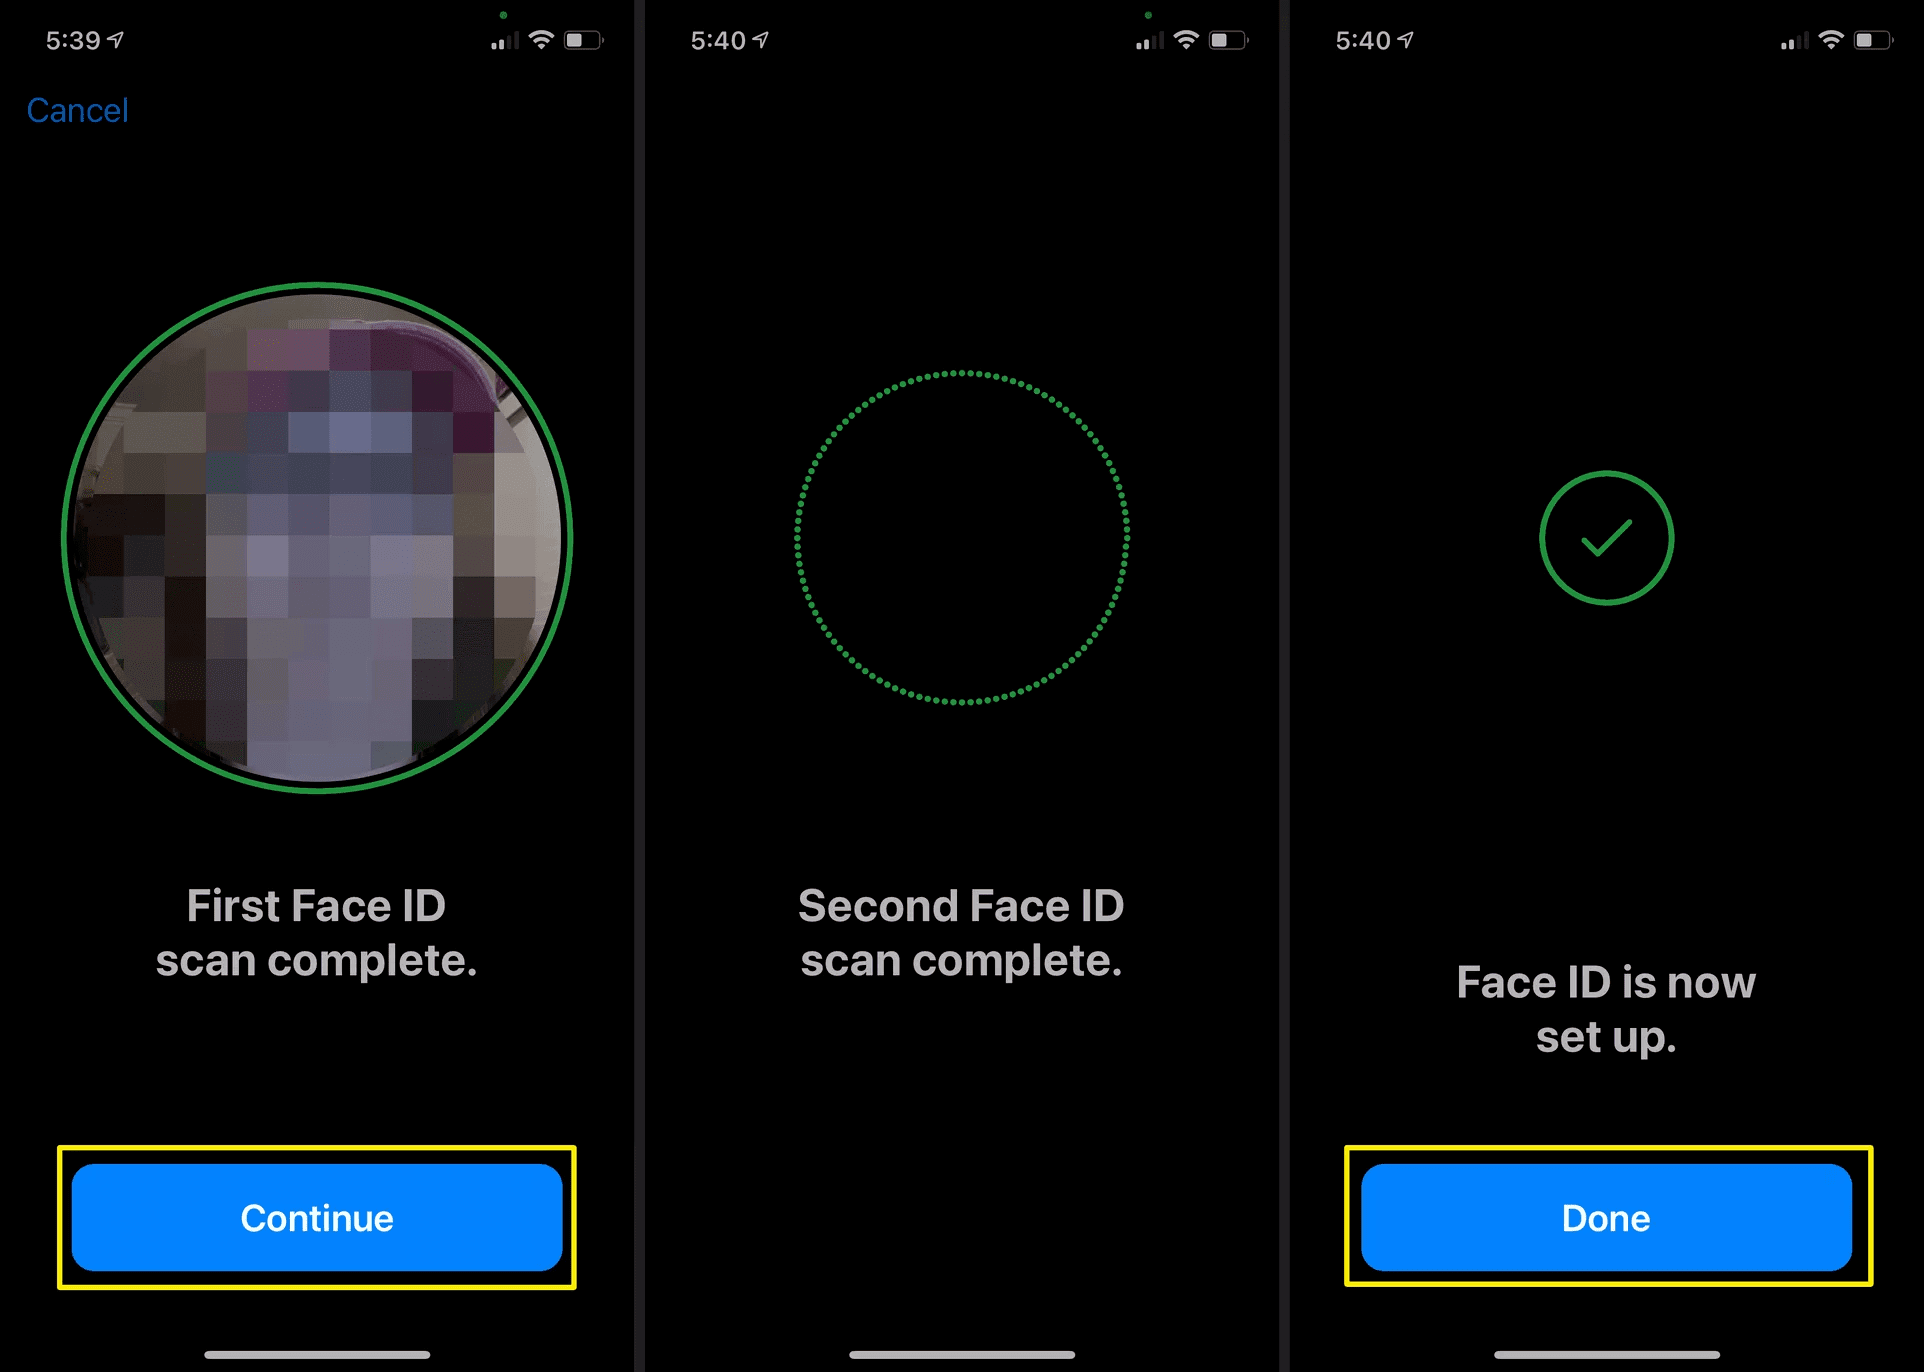 How to Add Another Face ID on iPhone?